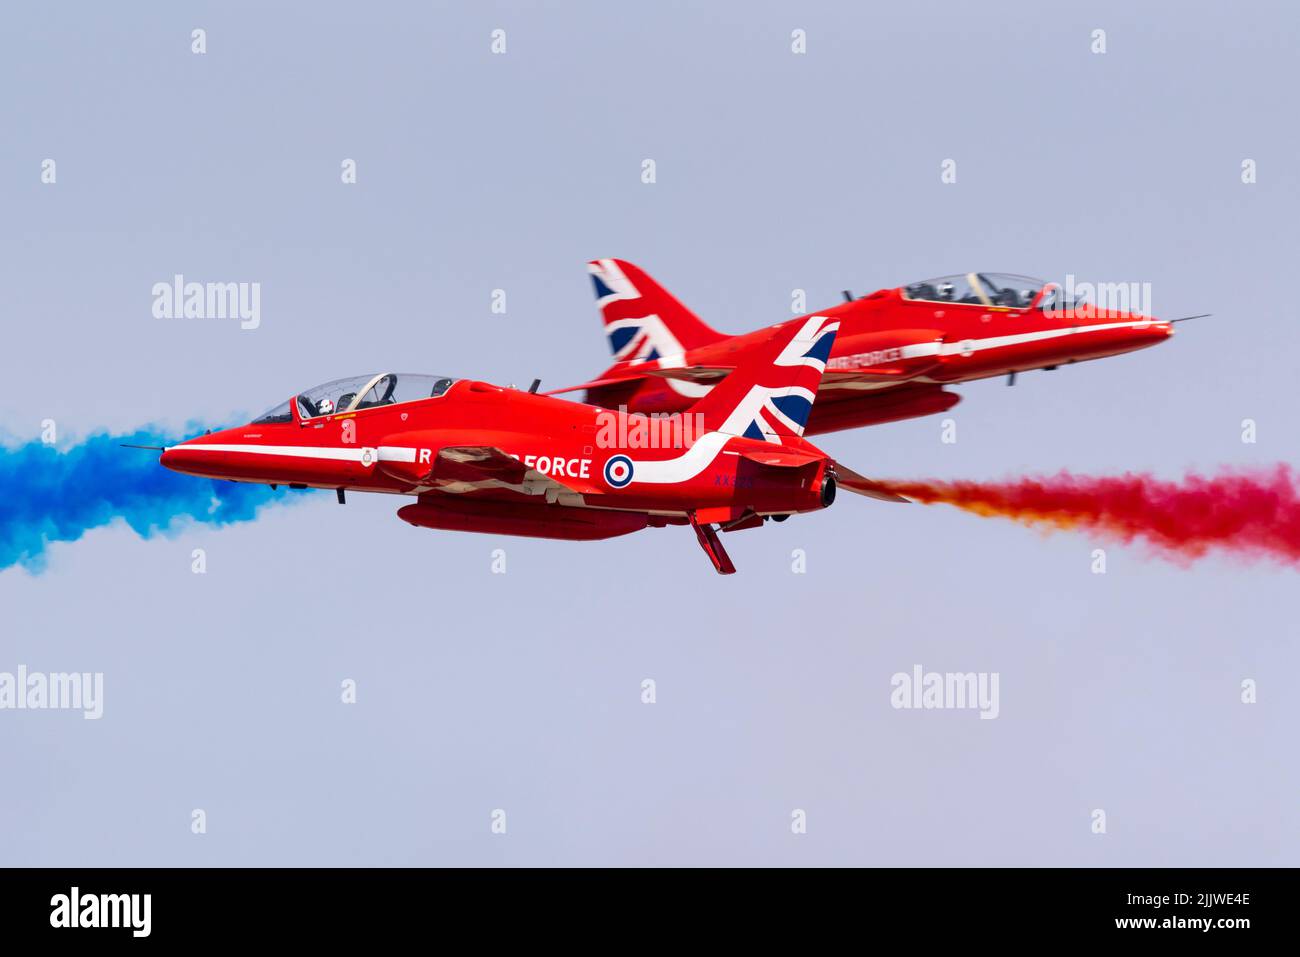 Royal Air Force Red Arrows display team flying at the Royal International Air Tattoo airshow at RAF Fairford, UK. Synchro Pair opposition pass Stock Photo